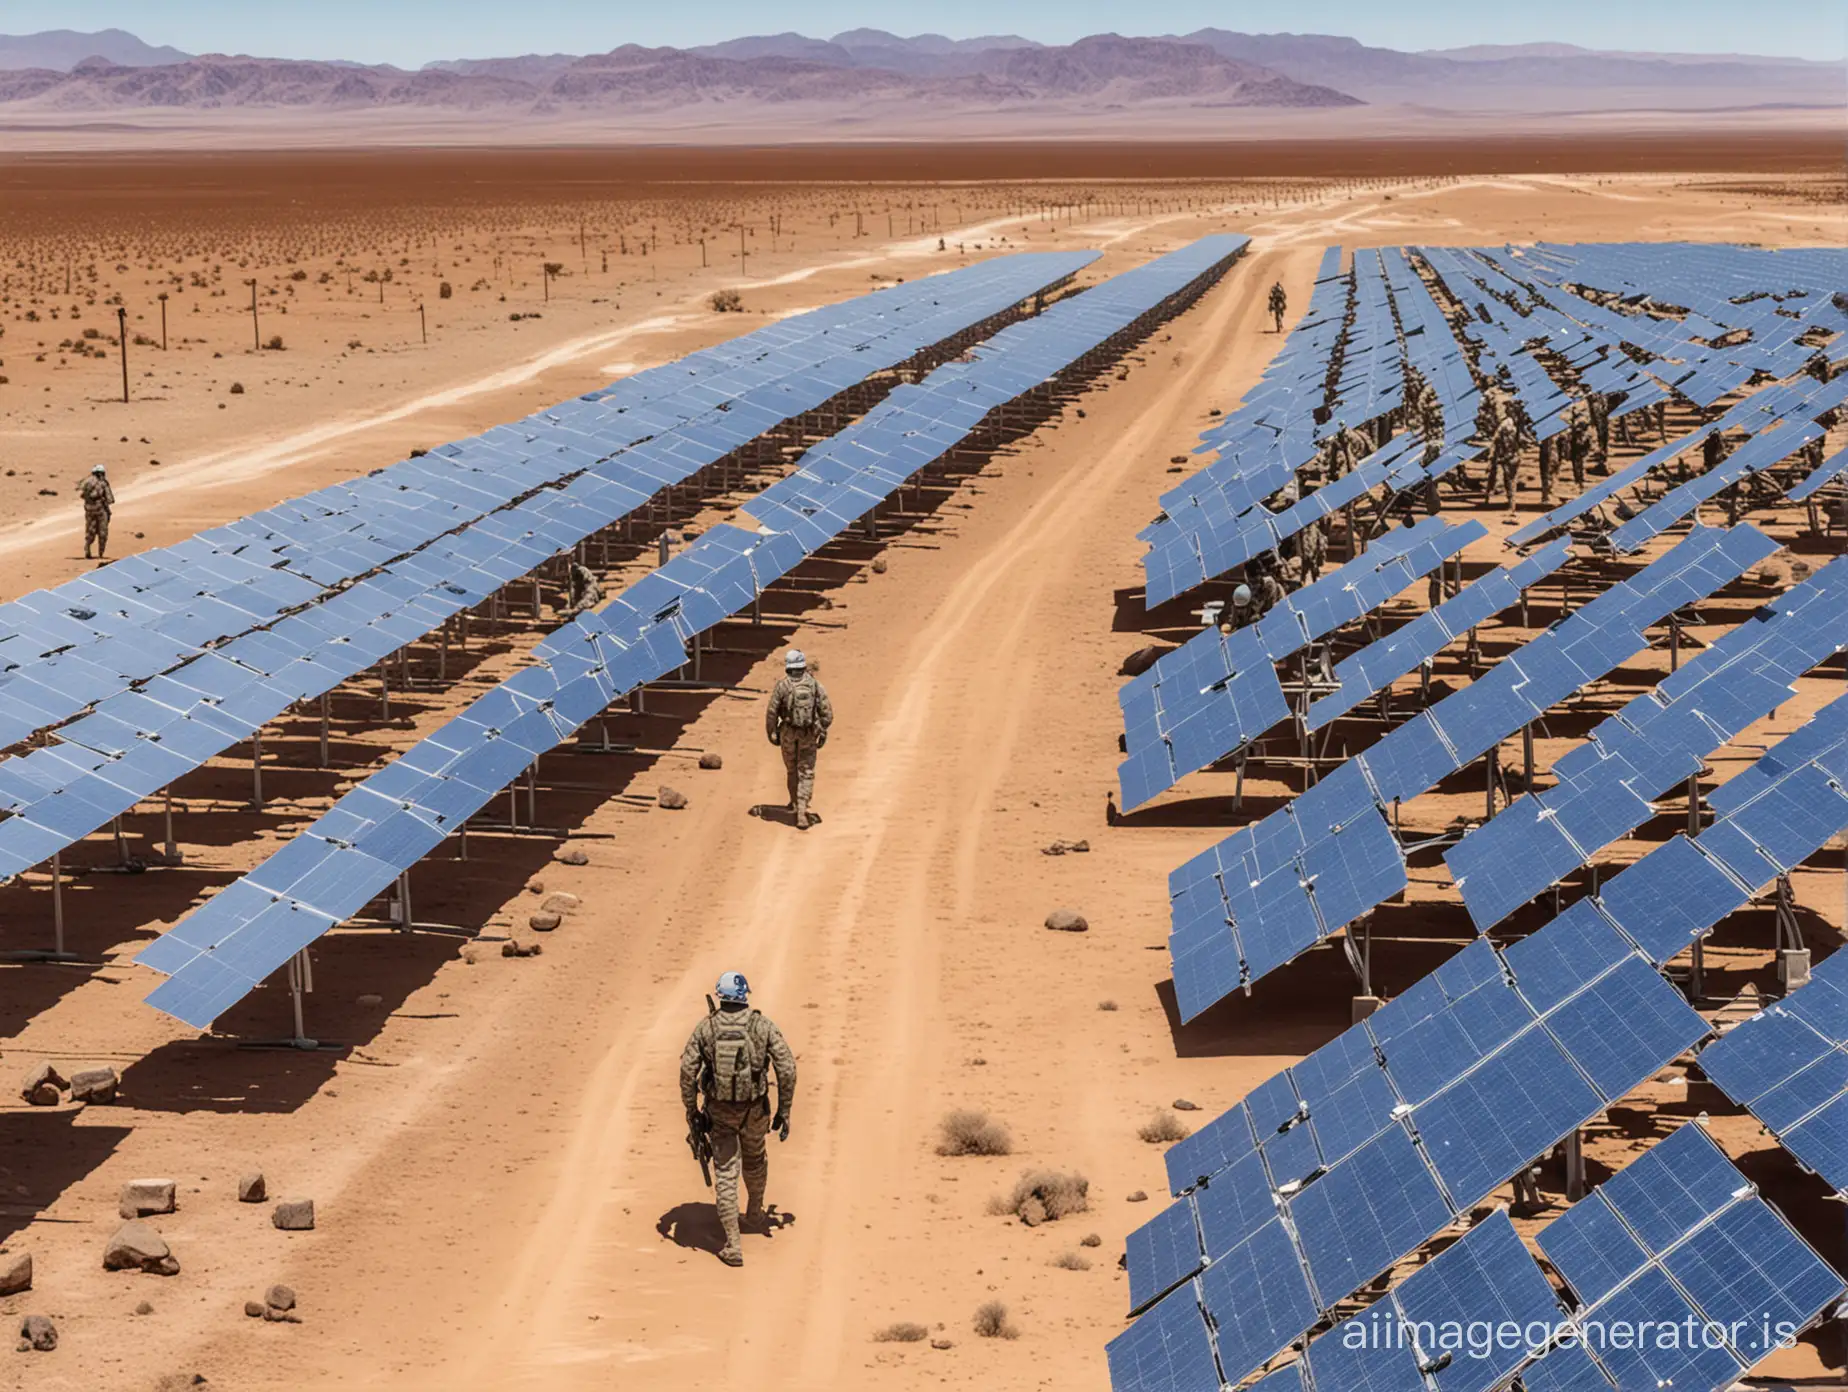 A vast solar energy farm stretches across a desert landscape, with rows of gleaming solar panels. In the foreground, soldiers stand guard, armed with rifles. Coloring: Blues and whites for the solar panels, contrasting colors for the logos, muted browns and greys for the desert and background.